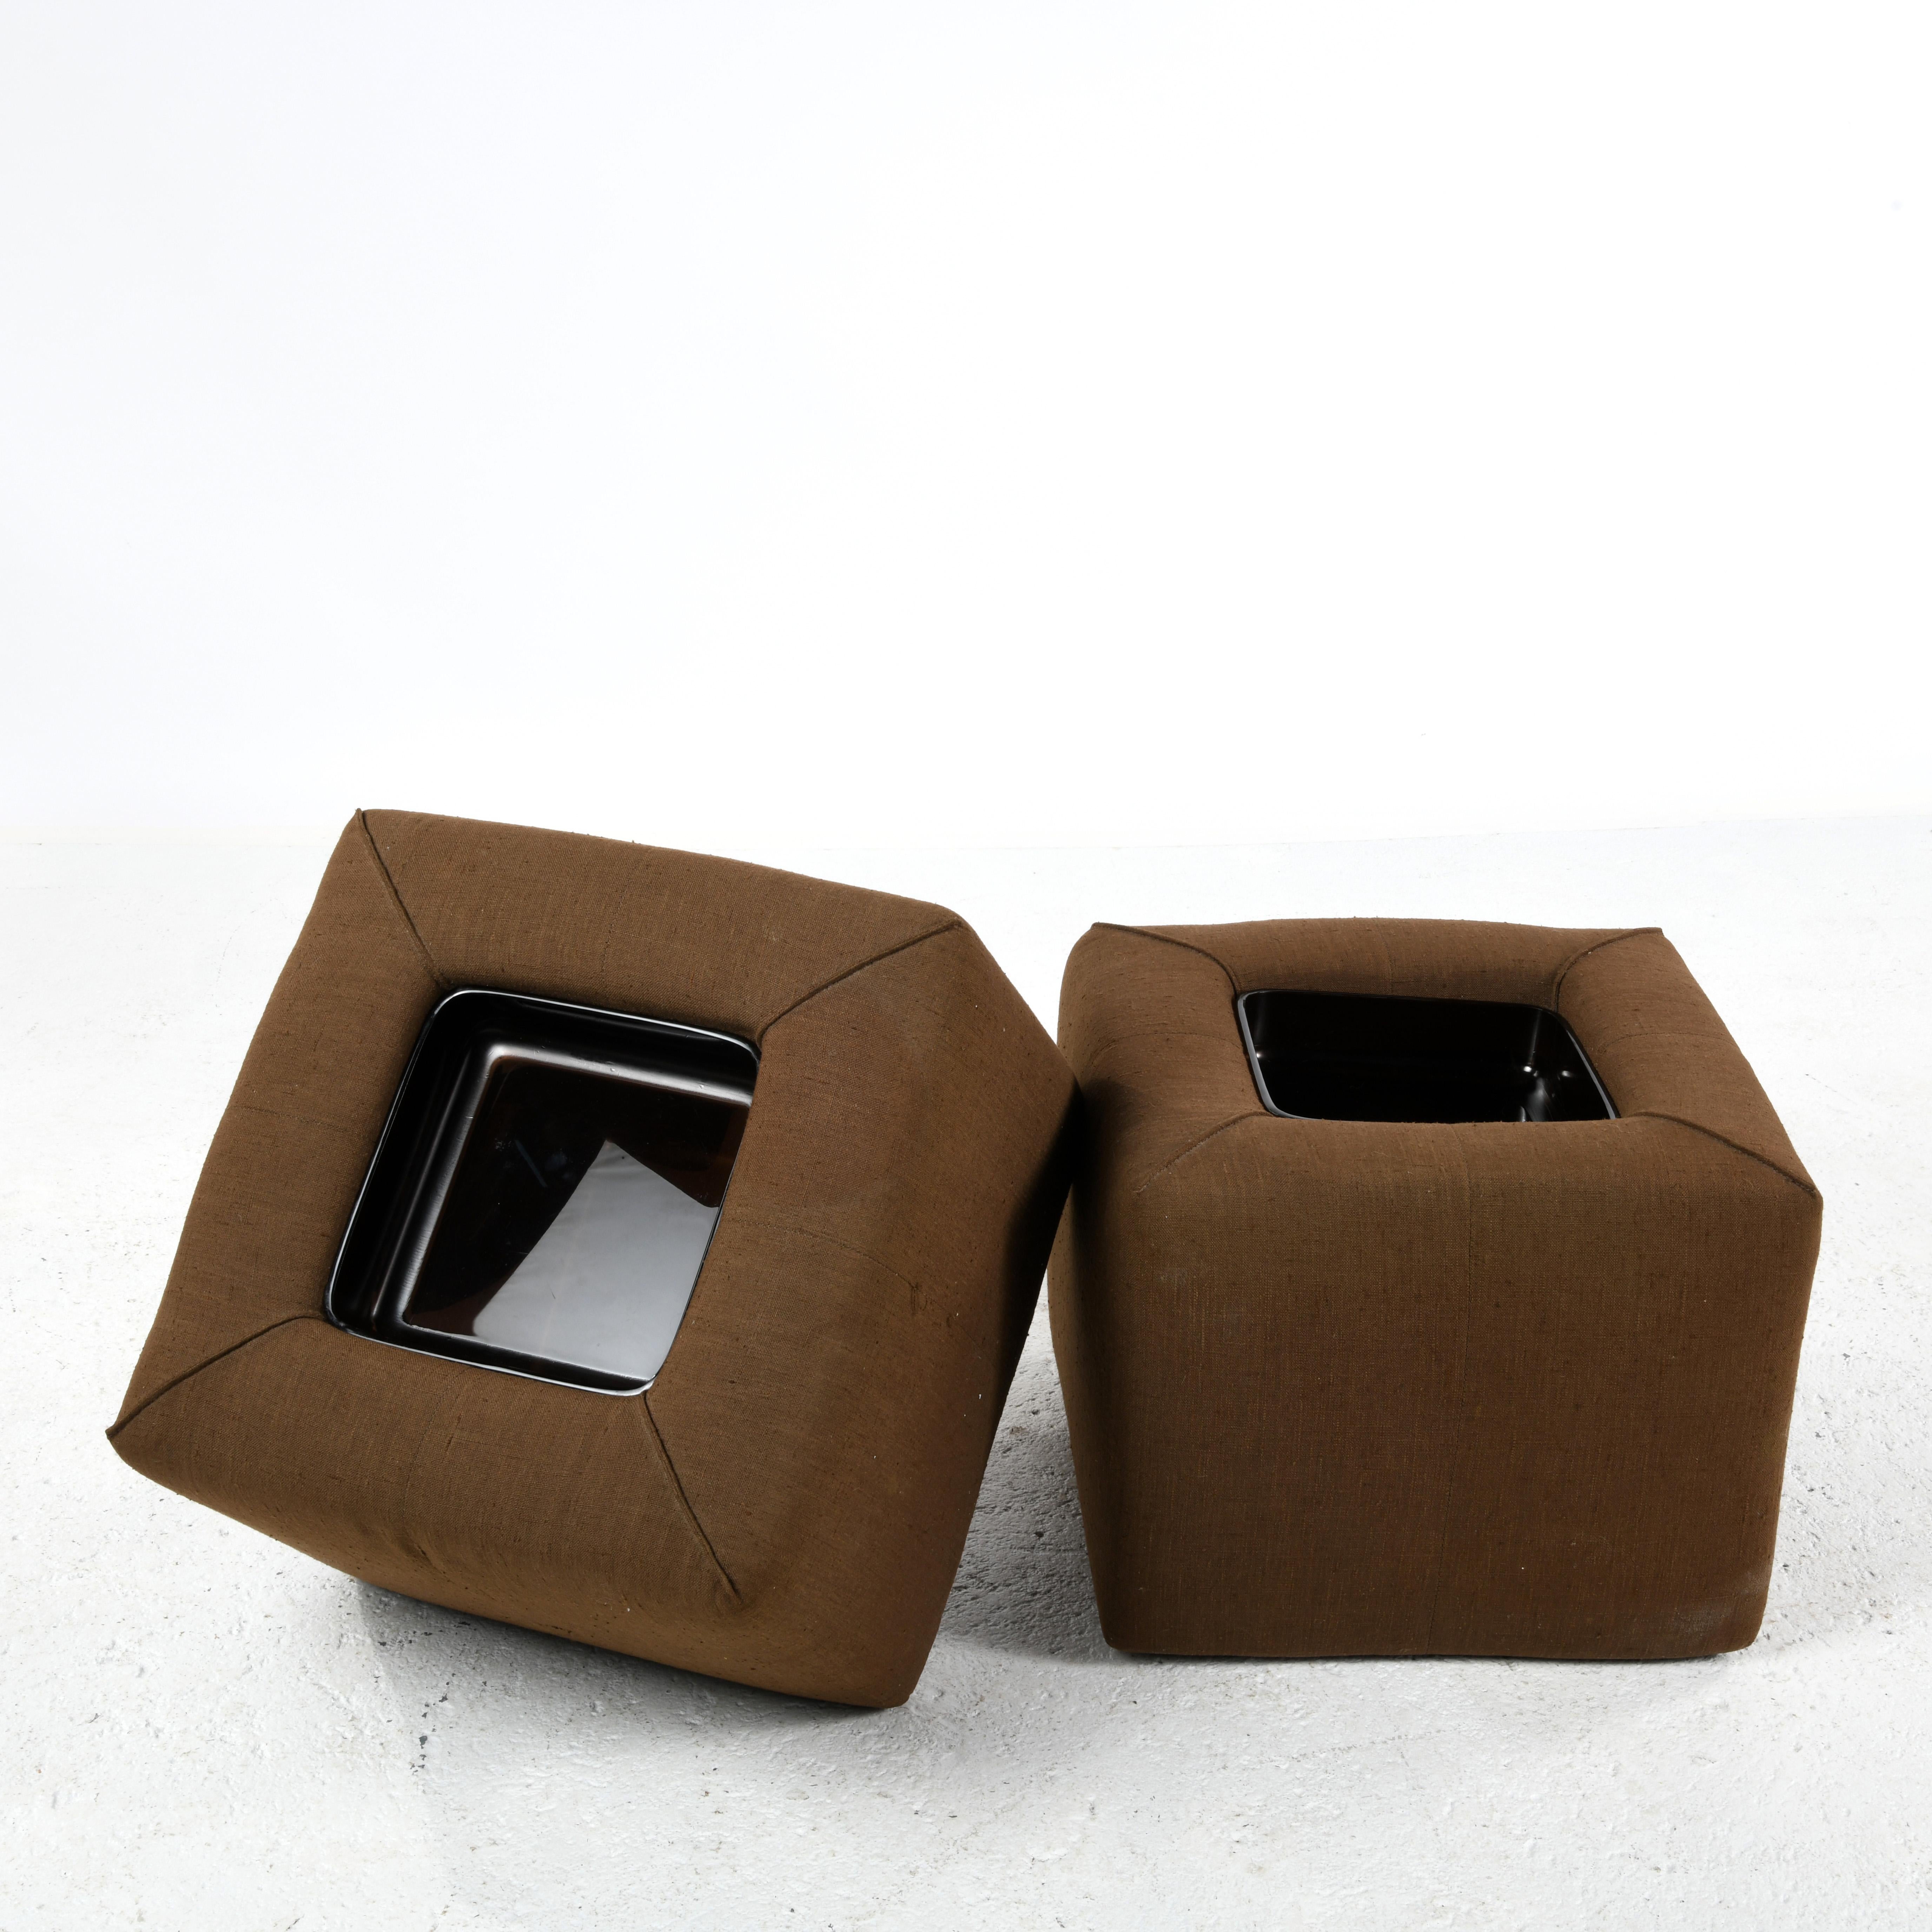 Pair of sofa ends from the 1970s, produced by Cinna in France. Foam cubes covered in brown linen fabric with removable covers. Inside is a smoked Plexiglas storage cube with a lid that can be positioned in two ways, forming a convex or concave